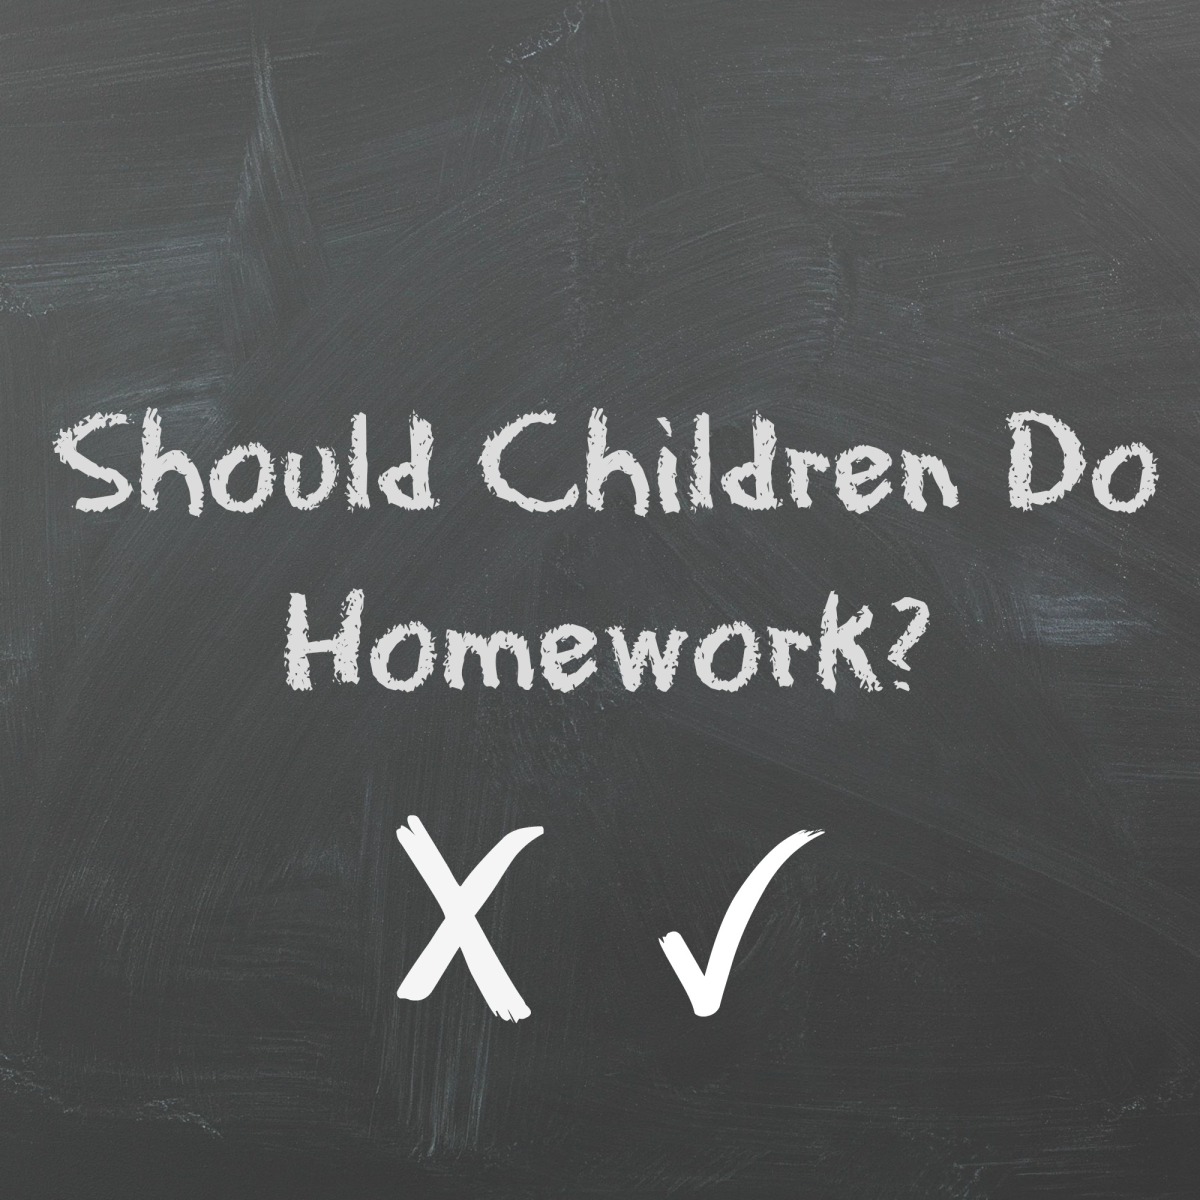 The controversy about the value of Homework